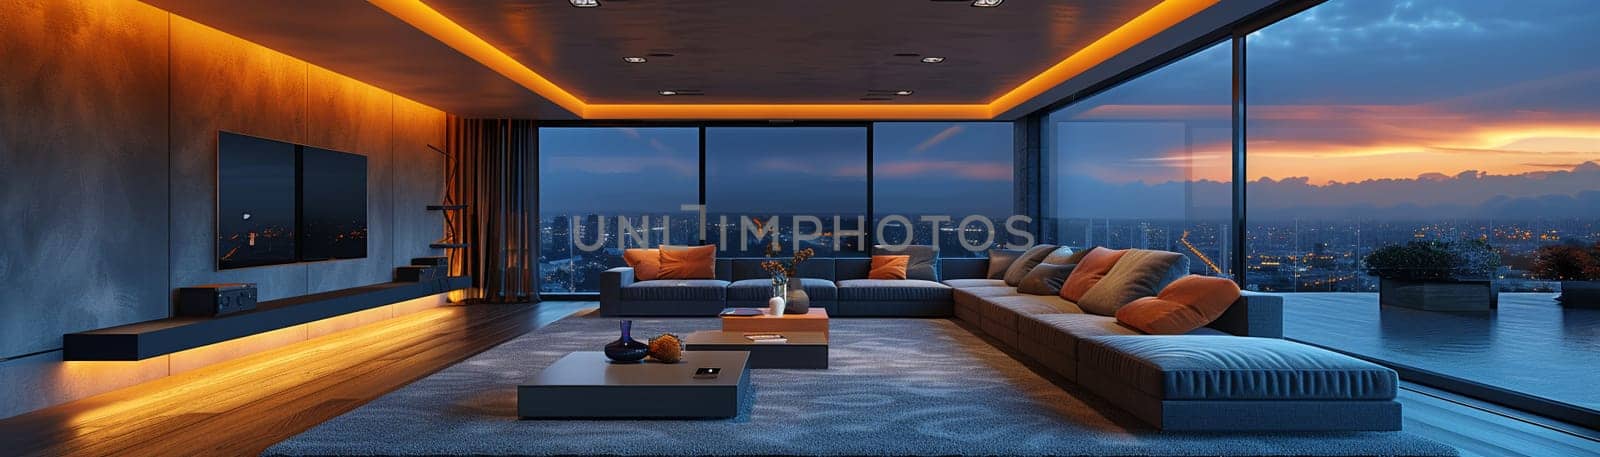 High-tech smart home living room with integrated technology and sleek furnitureup32K HD by Benzoix